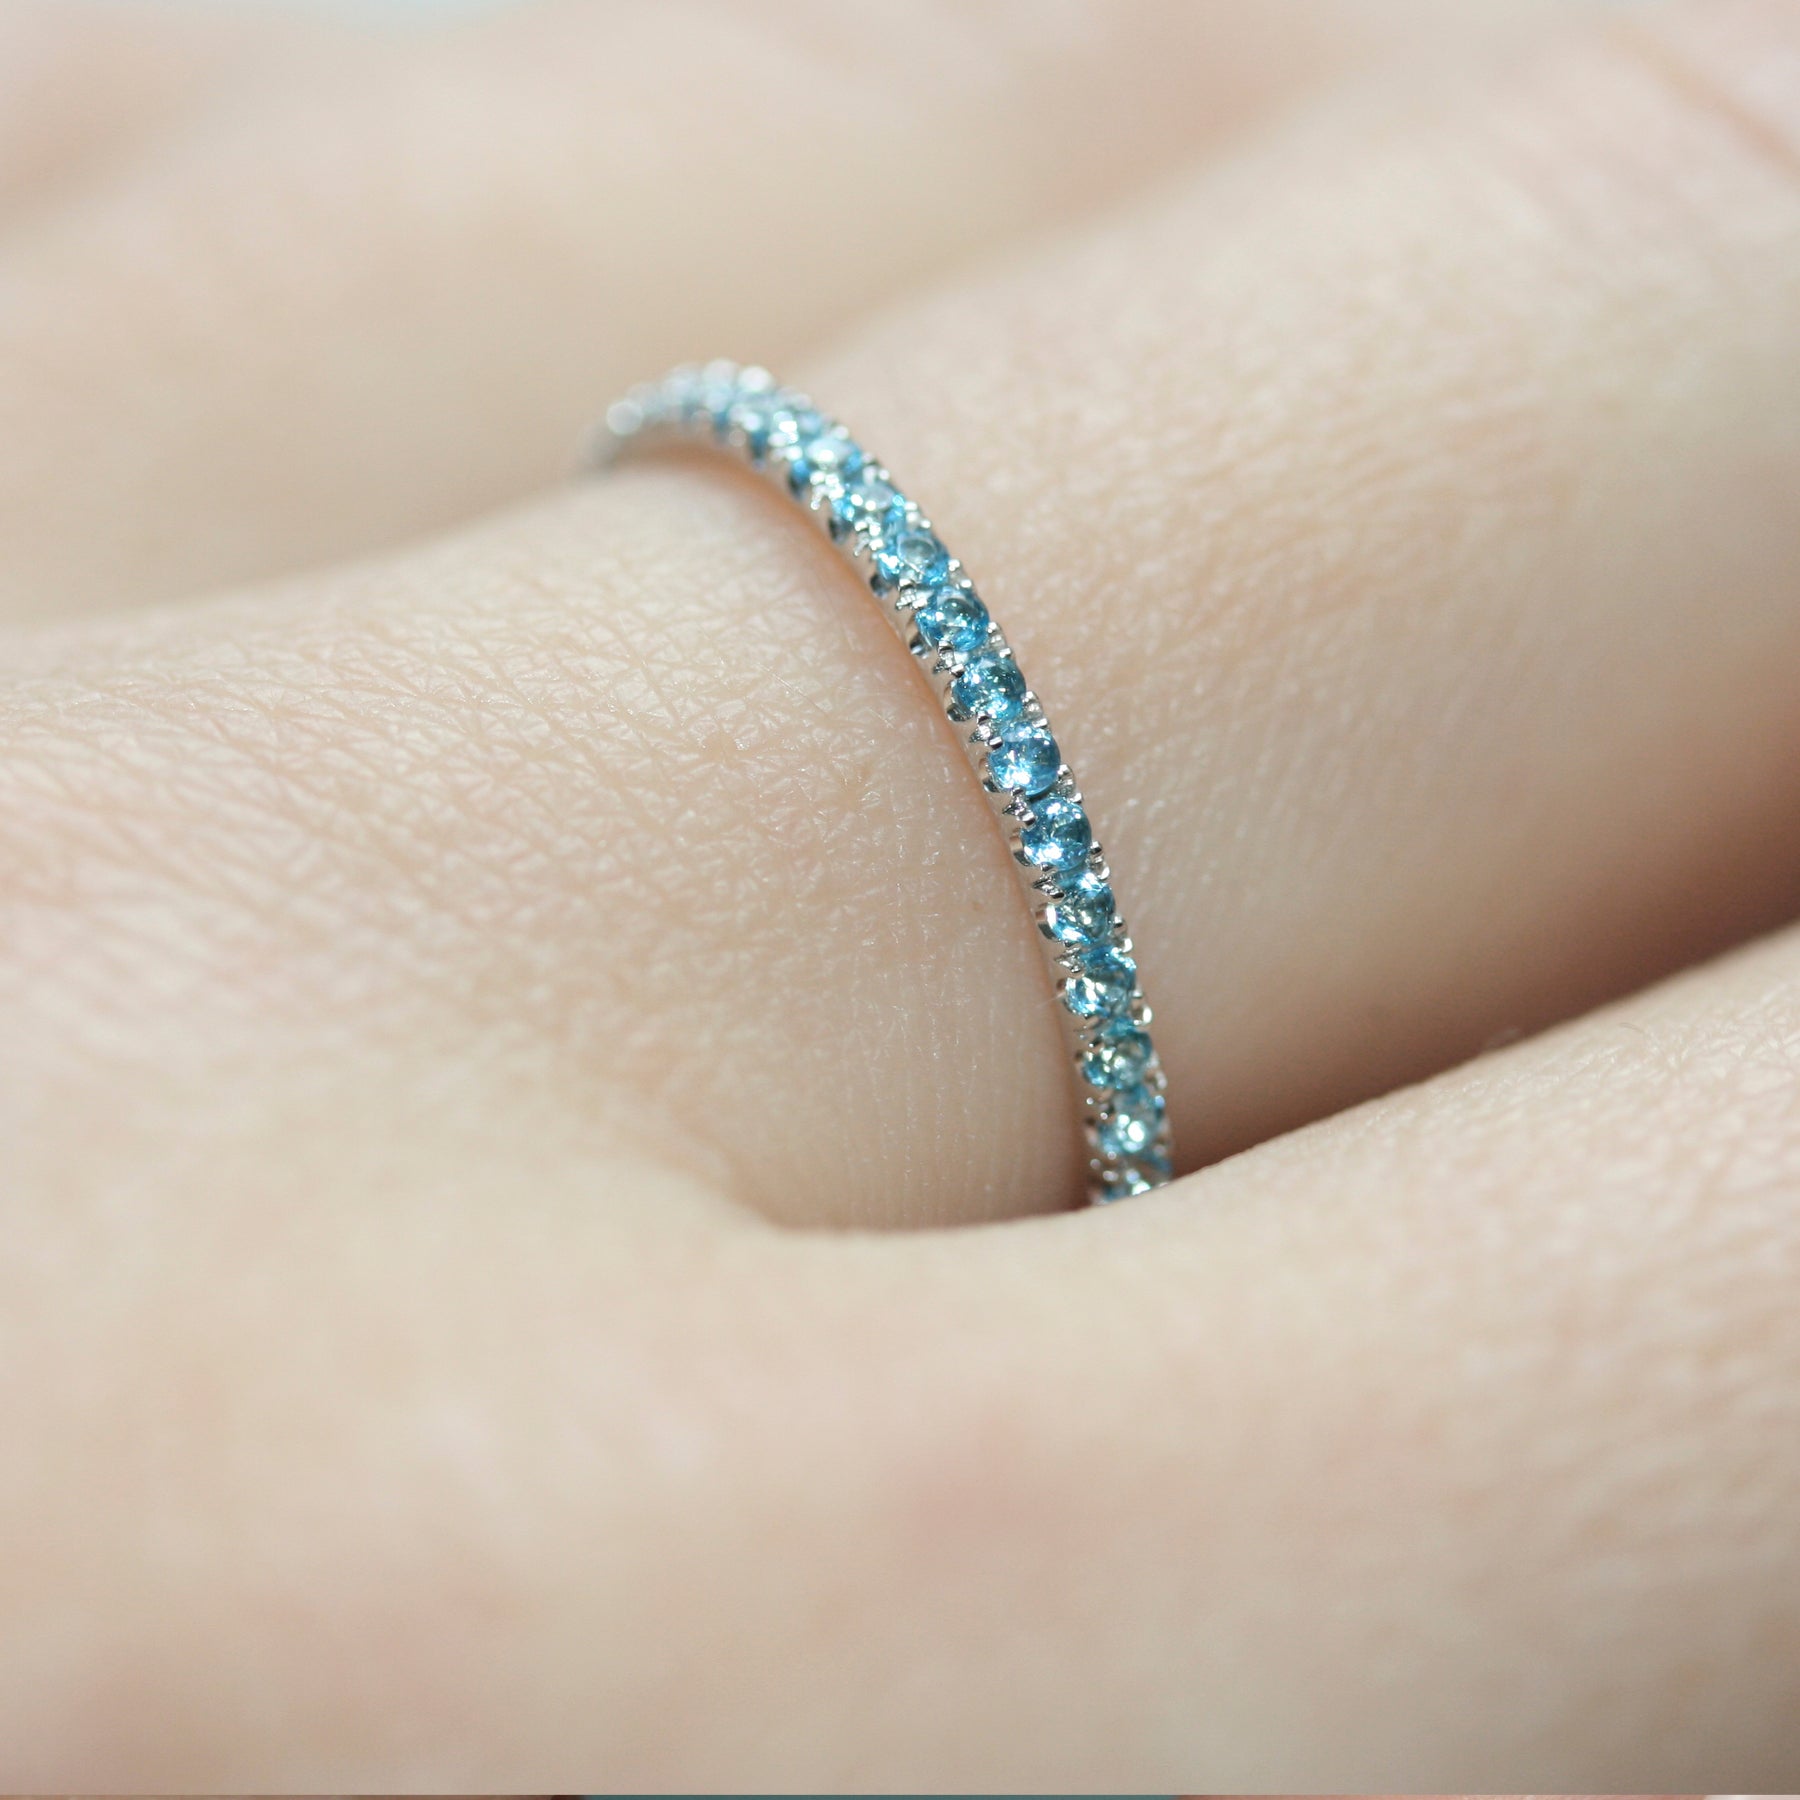 Closeup of a blue Topaz eternity ring in platinum on a hand.